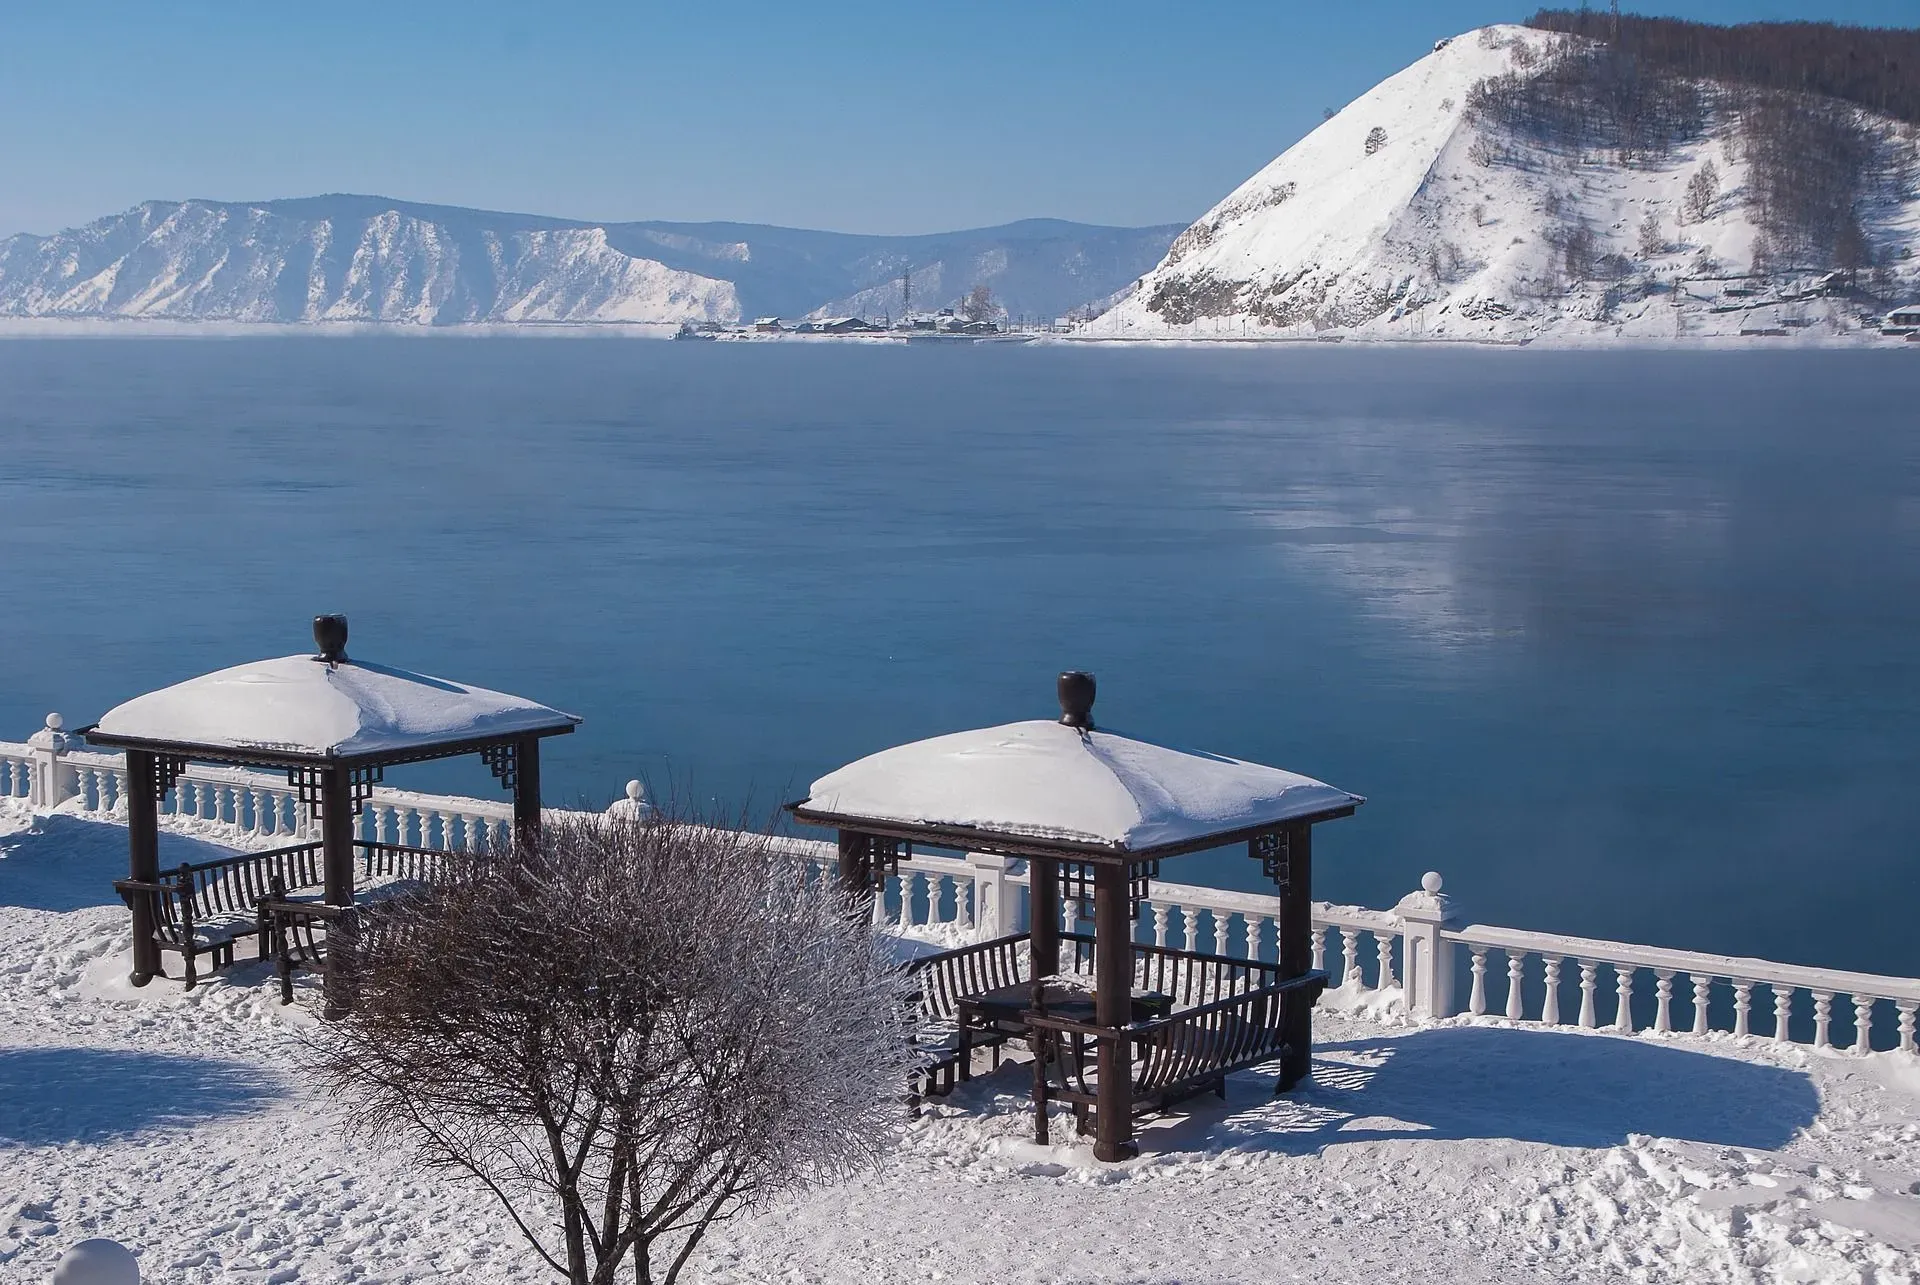 Lake Baikal facts state that this enormous lake is home to 20% of the world's fresh water.